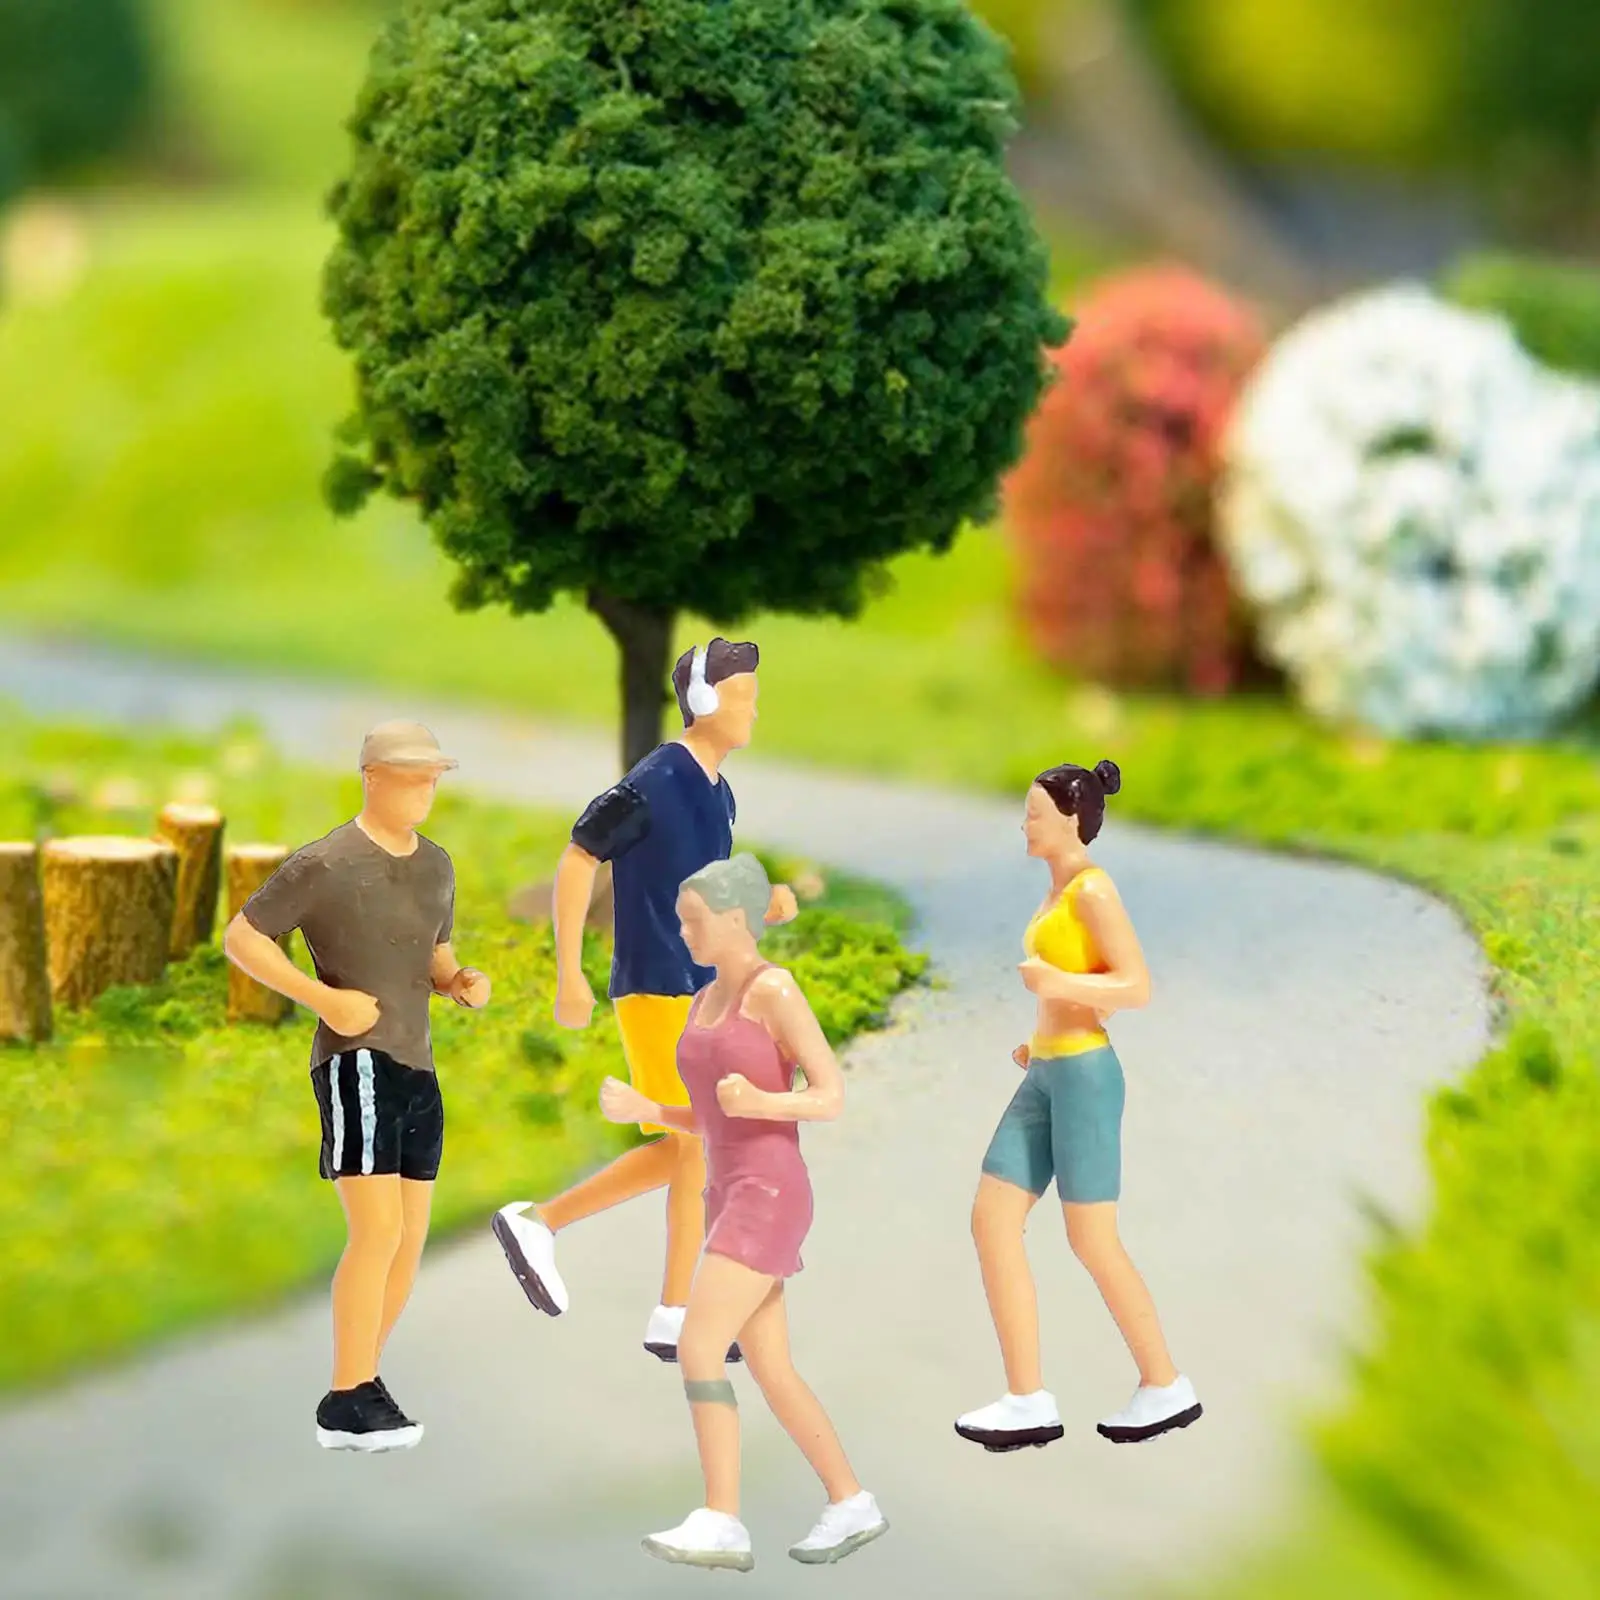 1/64 Scale Figures Decoration 1:64 Miniature Painted Figure Outdoor Sport Resin Figures of People for Park Architectural Playset